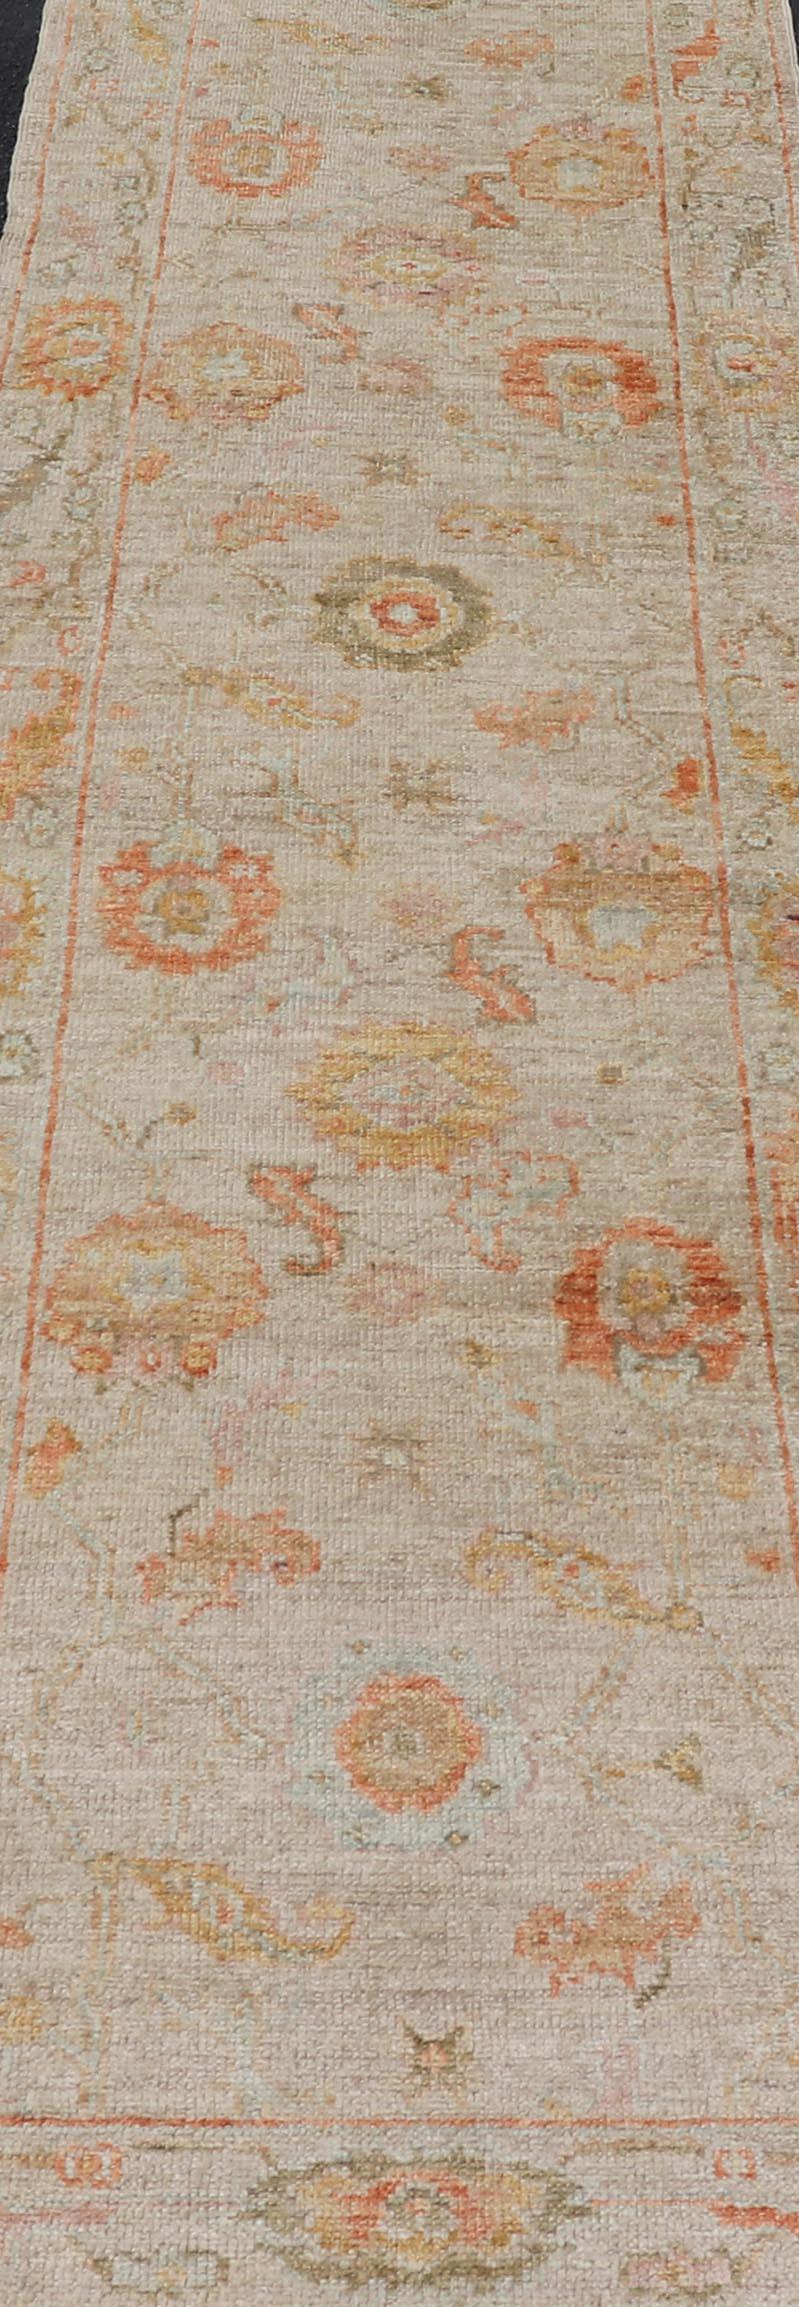 Wool Angora Turkish Oushak Floral Runner in Cream with Pops of Orange, Green and Blue For Sale